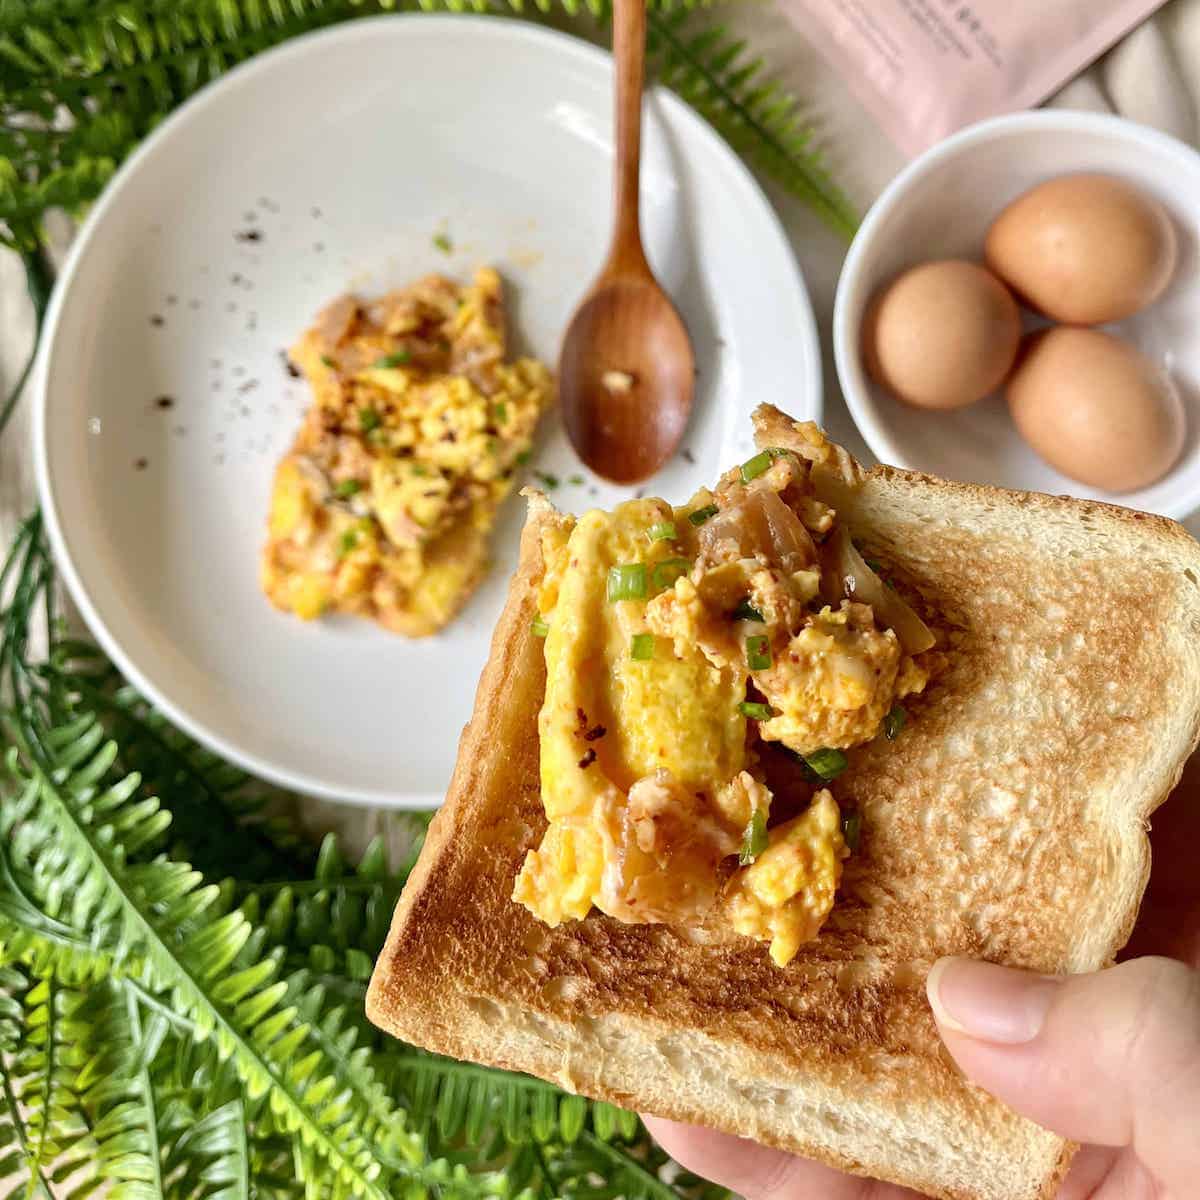 A half bitten piece of toast with kimchi and scrambled eggs on it.